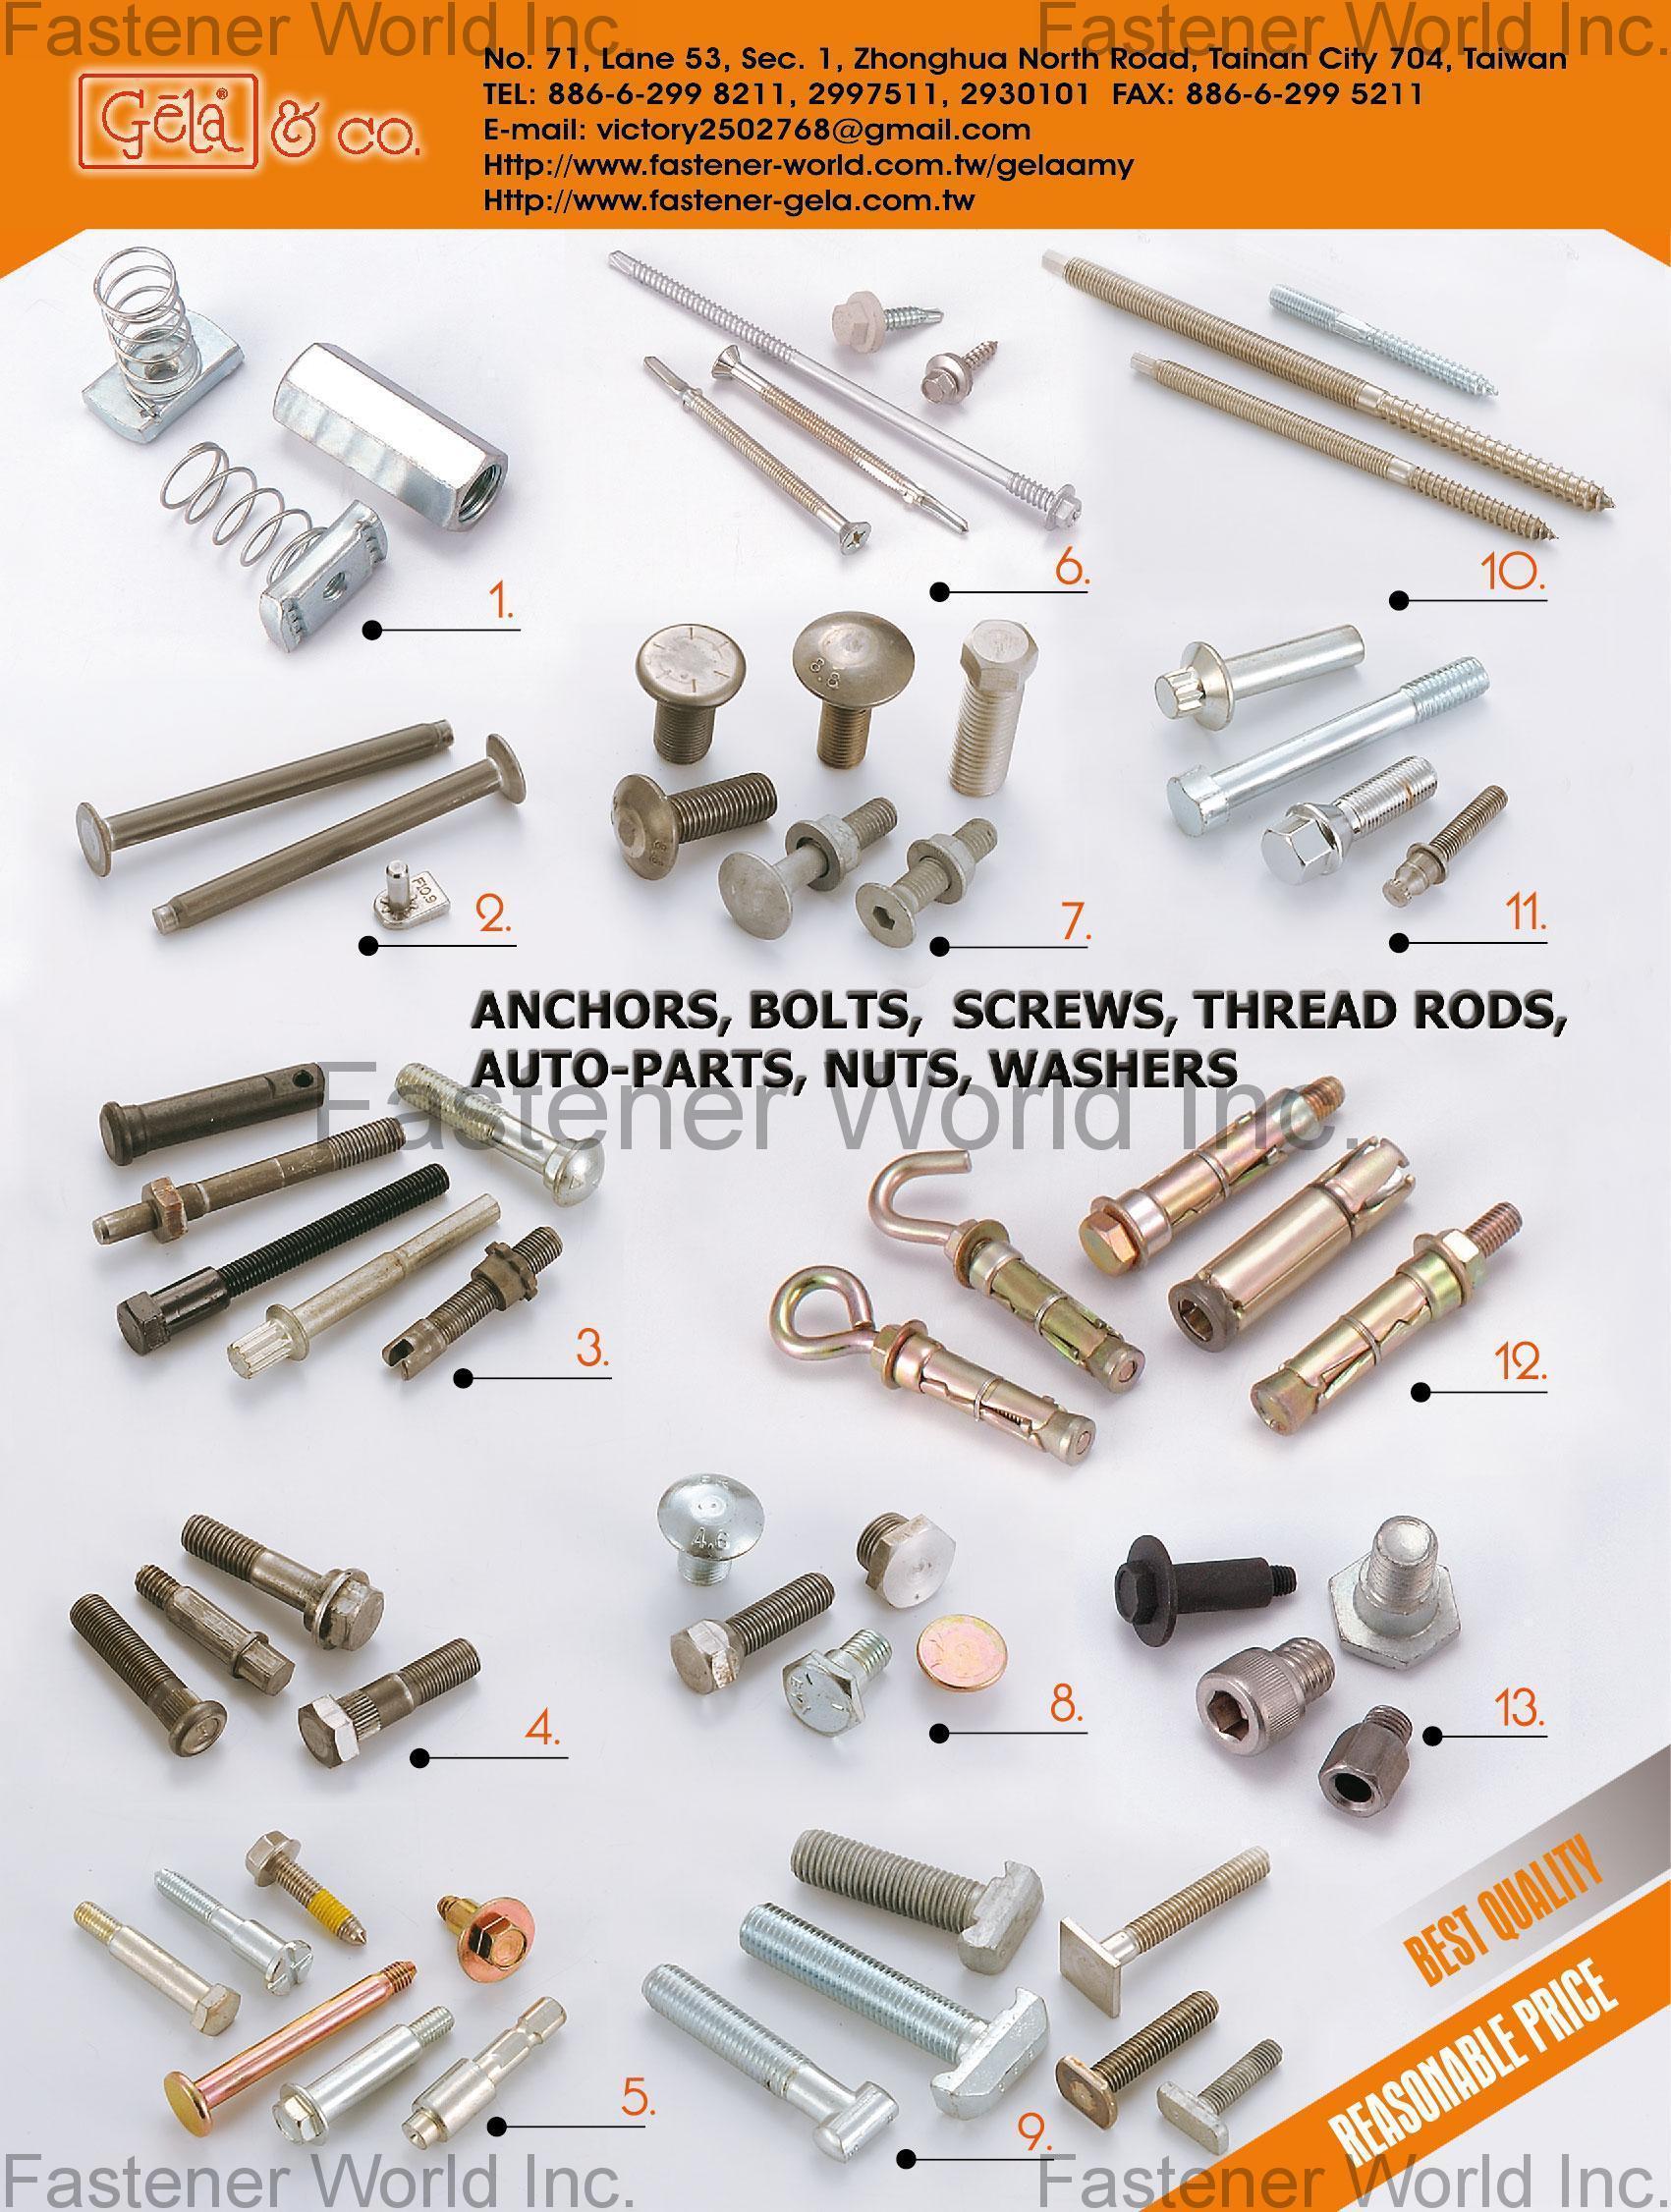 GELA & COMPANY  , ANCHORS, BOLTS, SCREWS, THREAD RODS, AUTO-PARTS, NUTS, WASHERS , All Kinds of Screws